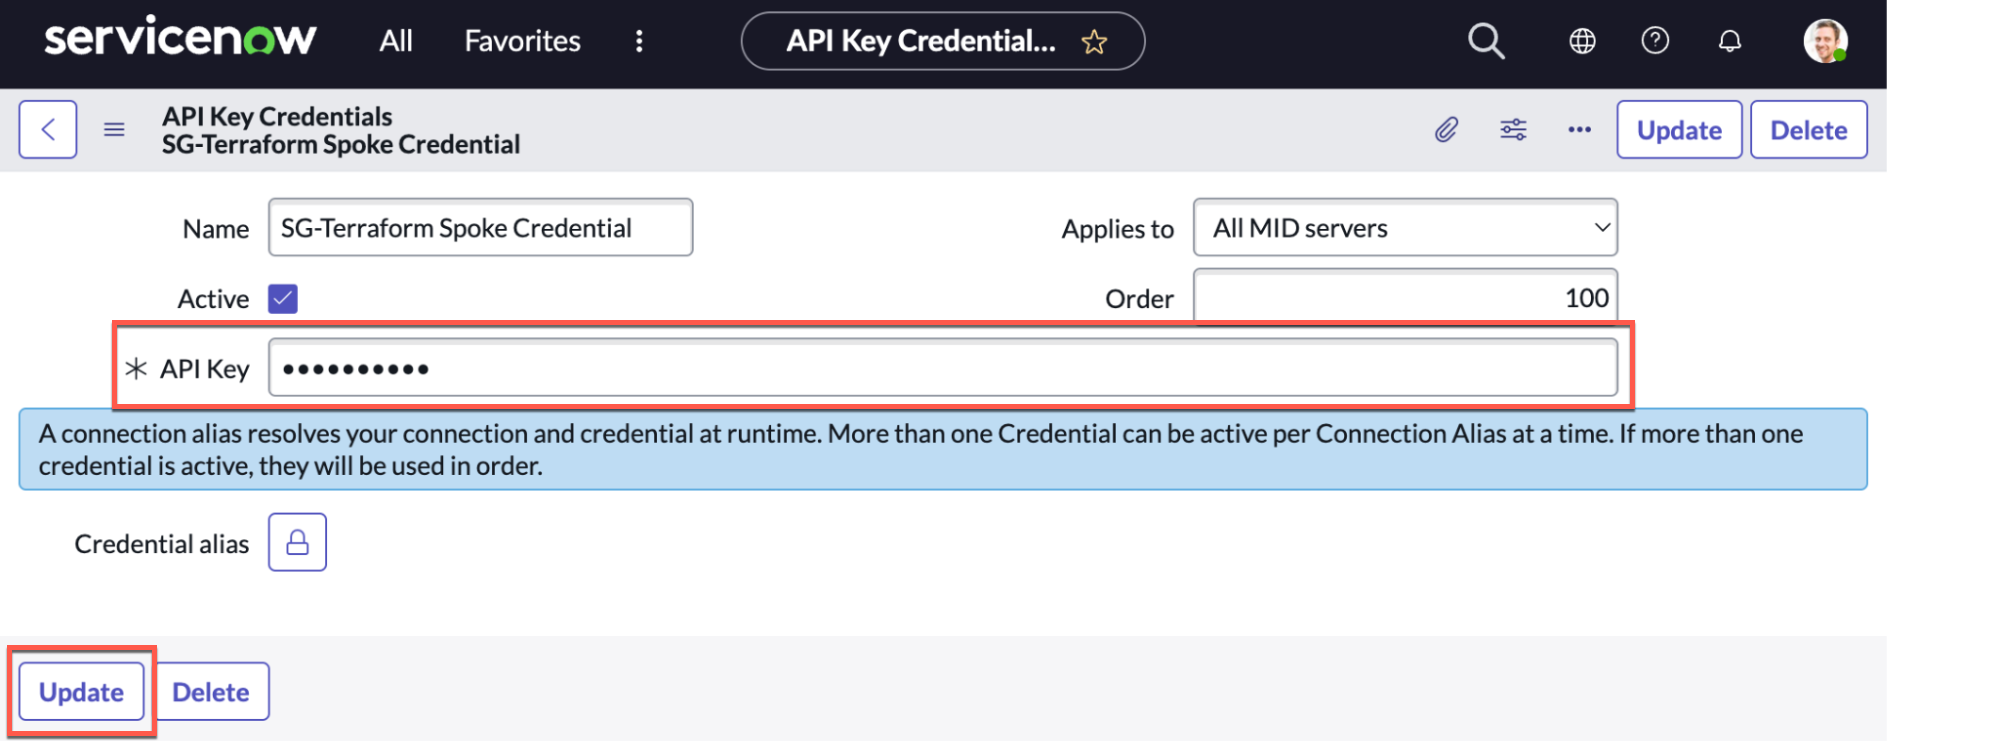 ServiceNow Service Graph Connector API Key Credentials configuration screen. The API key is provided, then saved by clicking the Update button